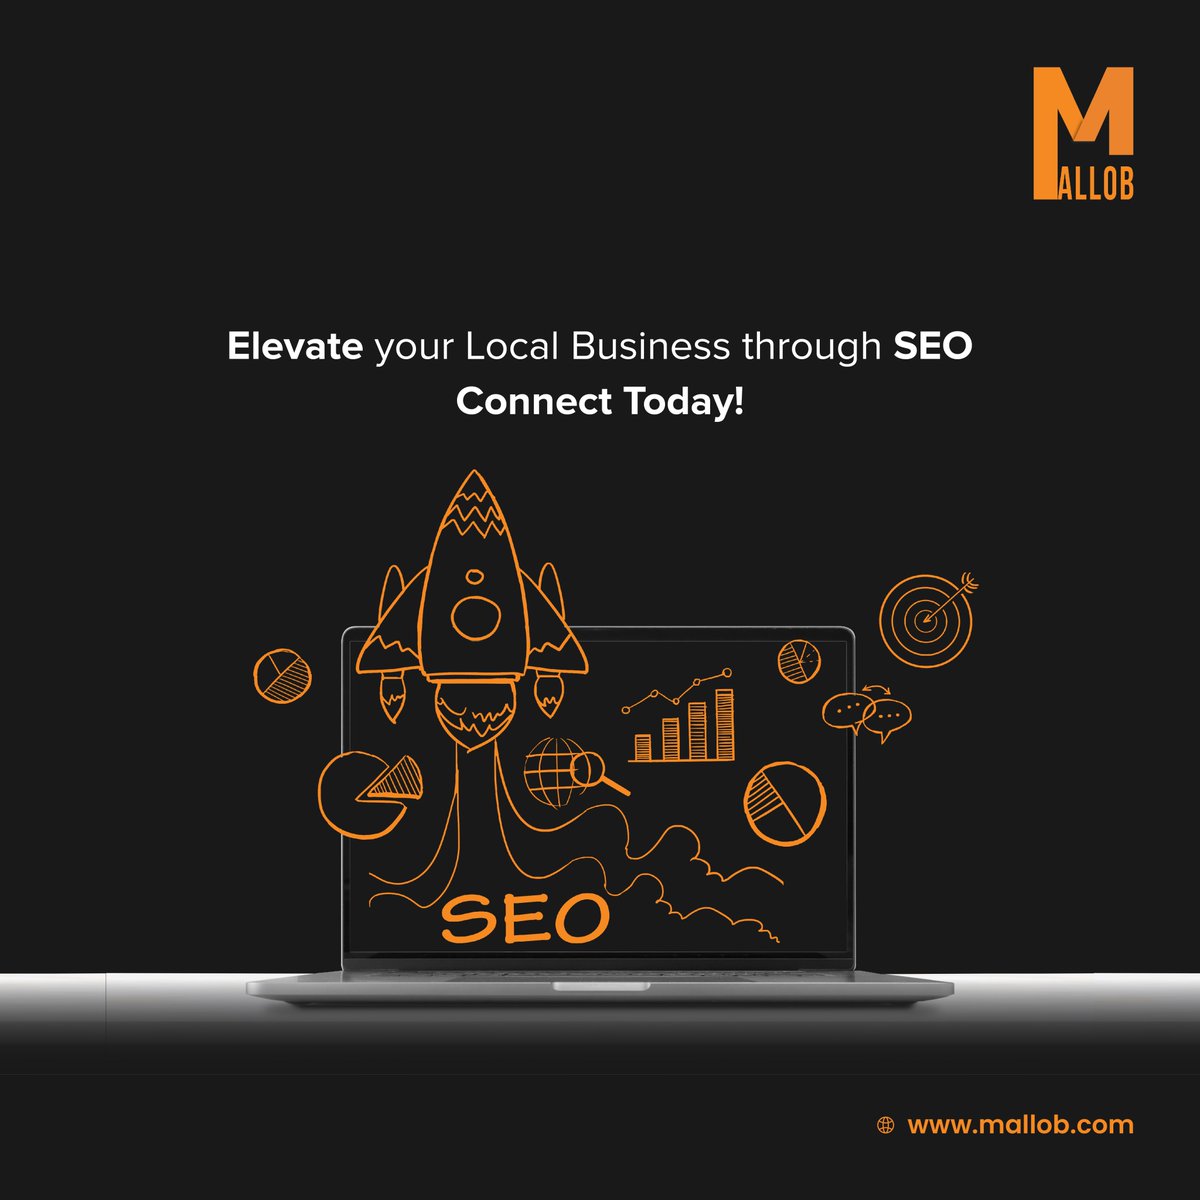 Shoot your business reach and engage your target audience with the strategic power of SEO, connect with us for the ultimate solution!

#digitalmarketingservices #SEO #SEOonpage #SEOoffpage
#mallob
#mallobgroup